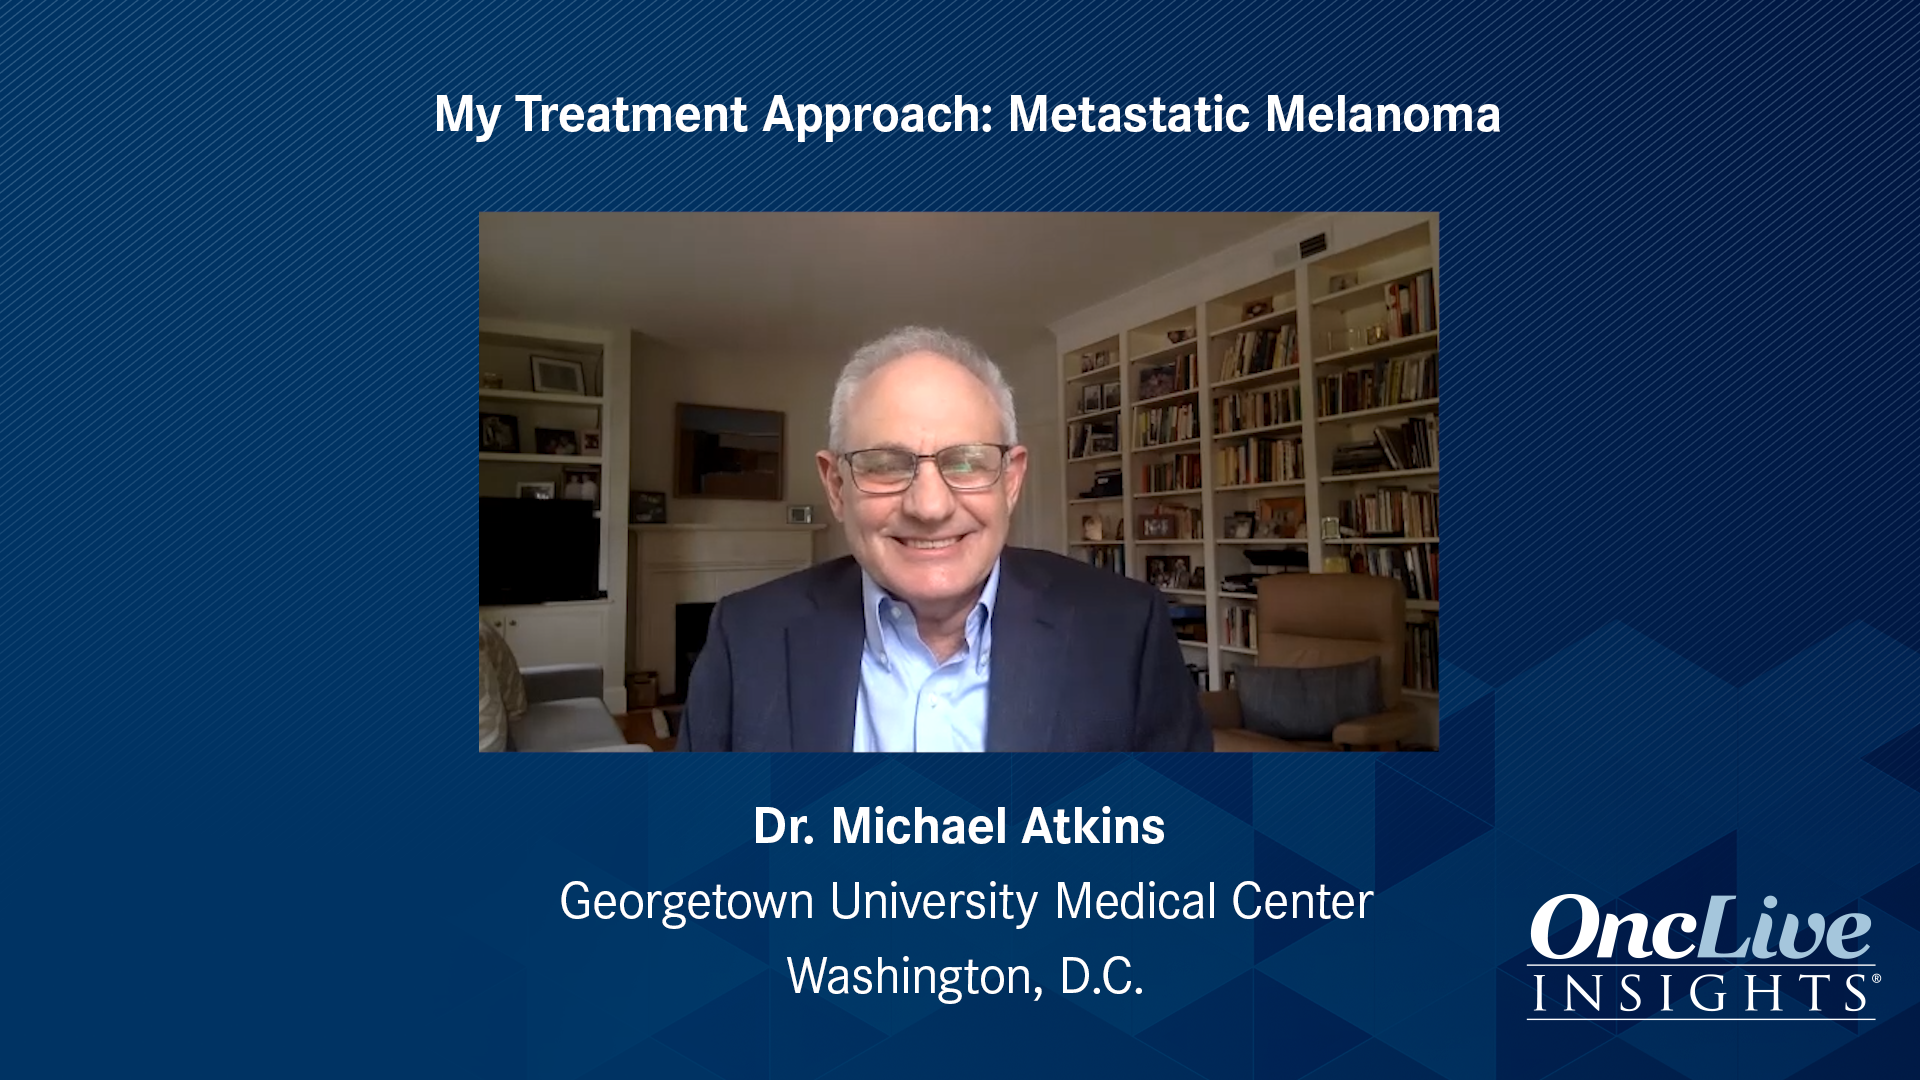 First-line and Subsequent Treatment Strategies for Unresectable/Metastatic Melanoma: A Patient Profile